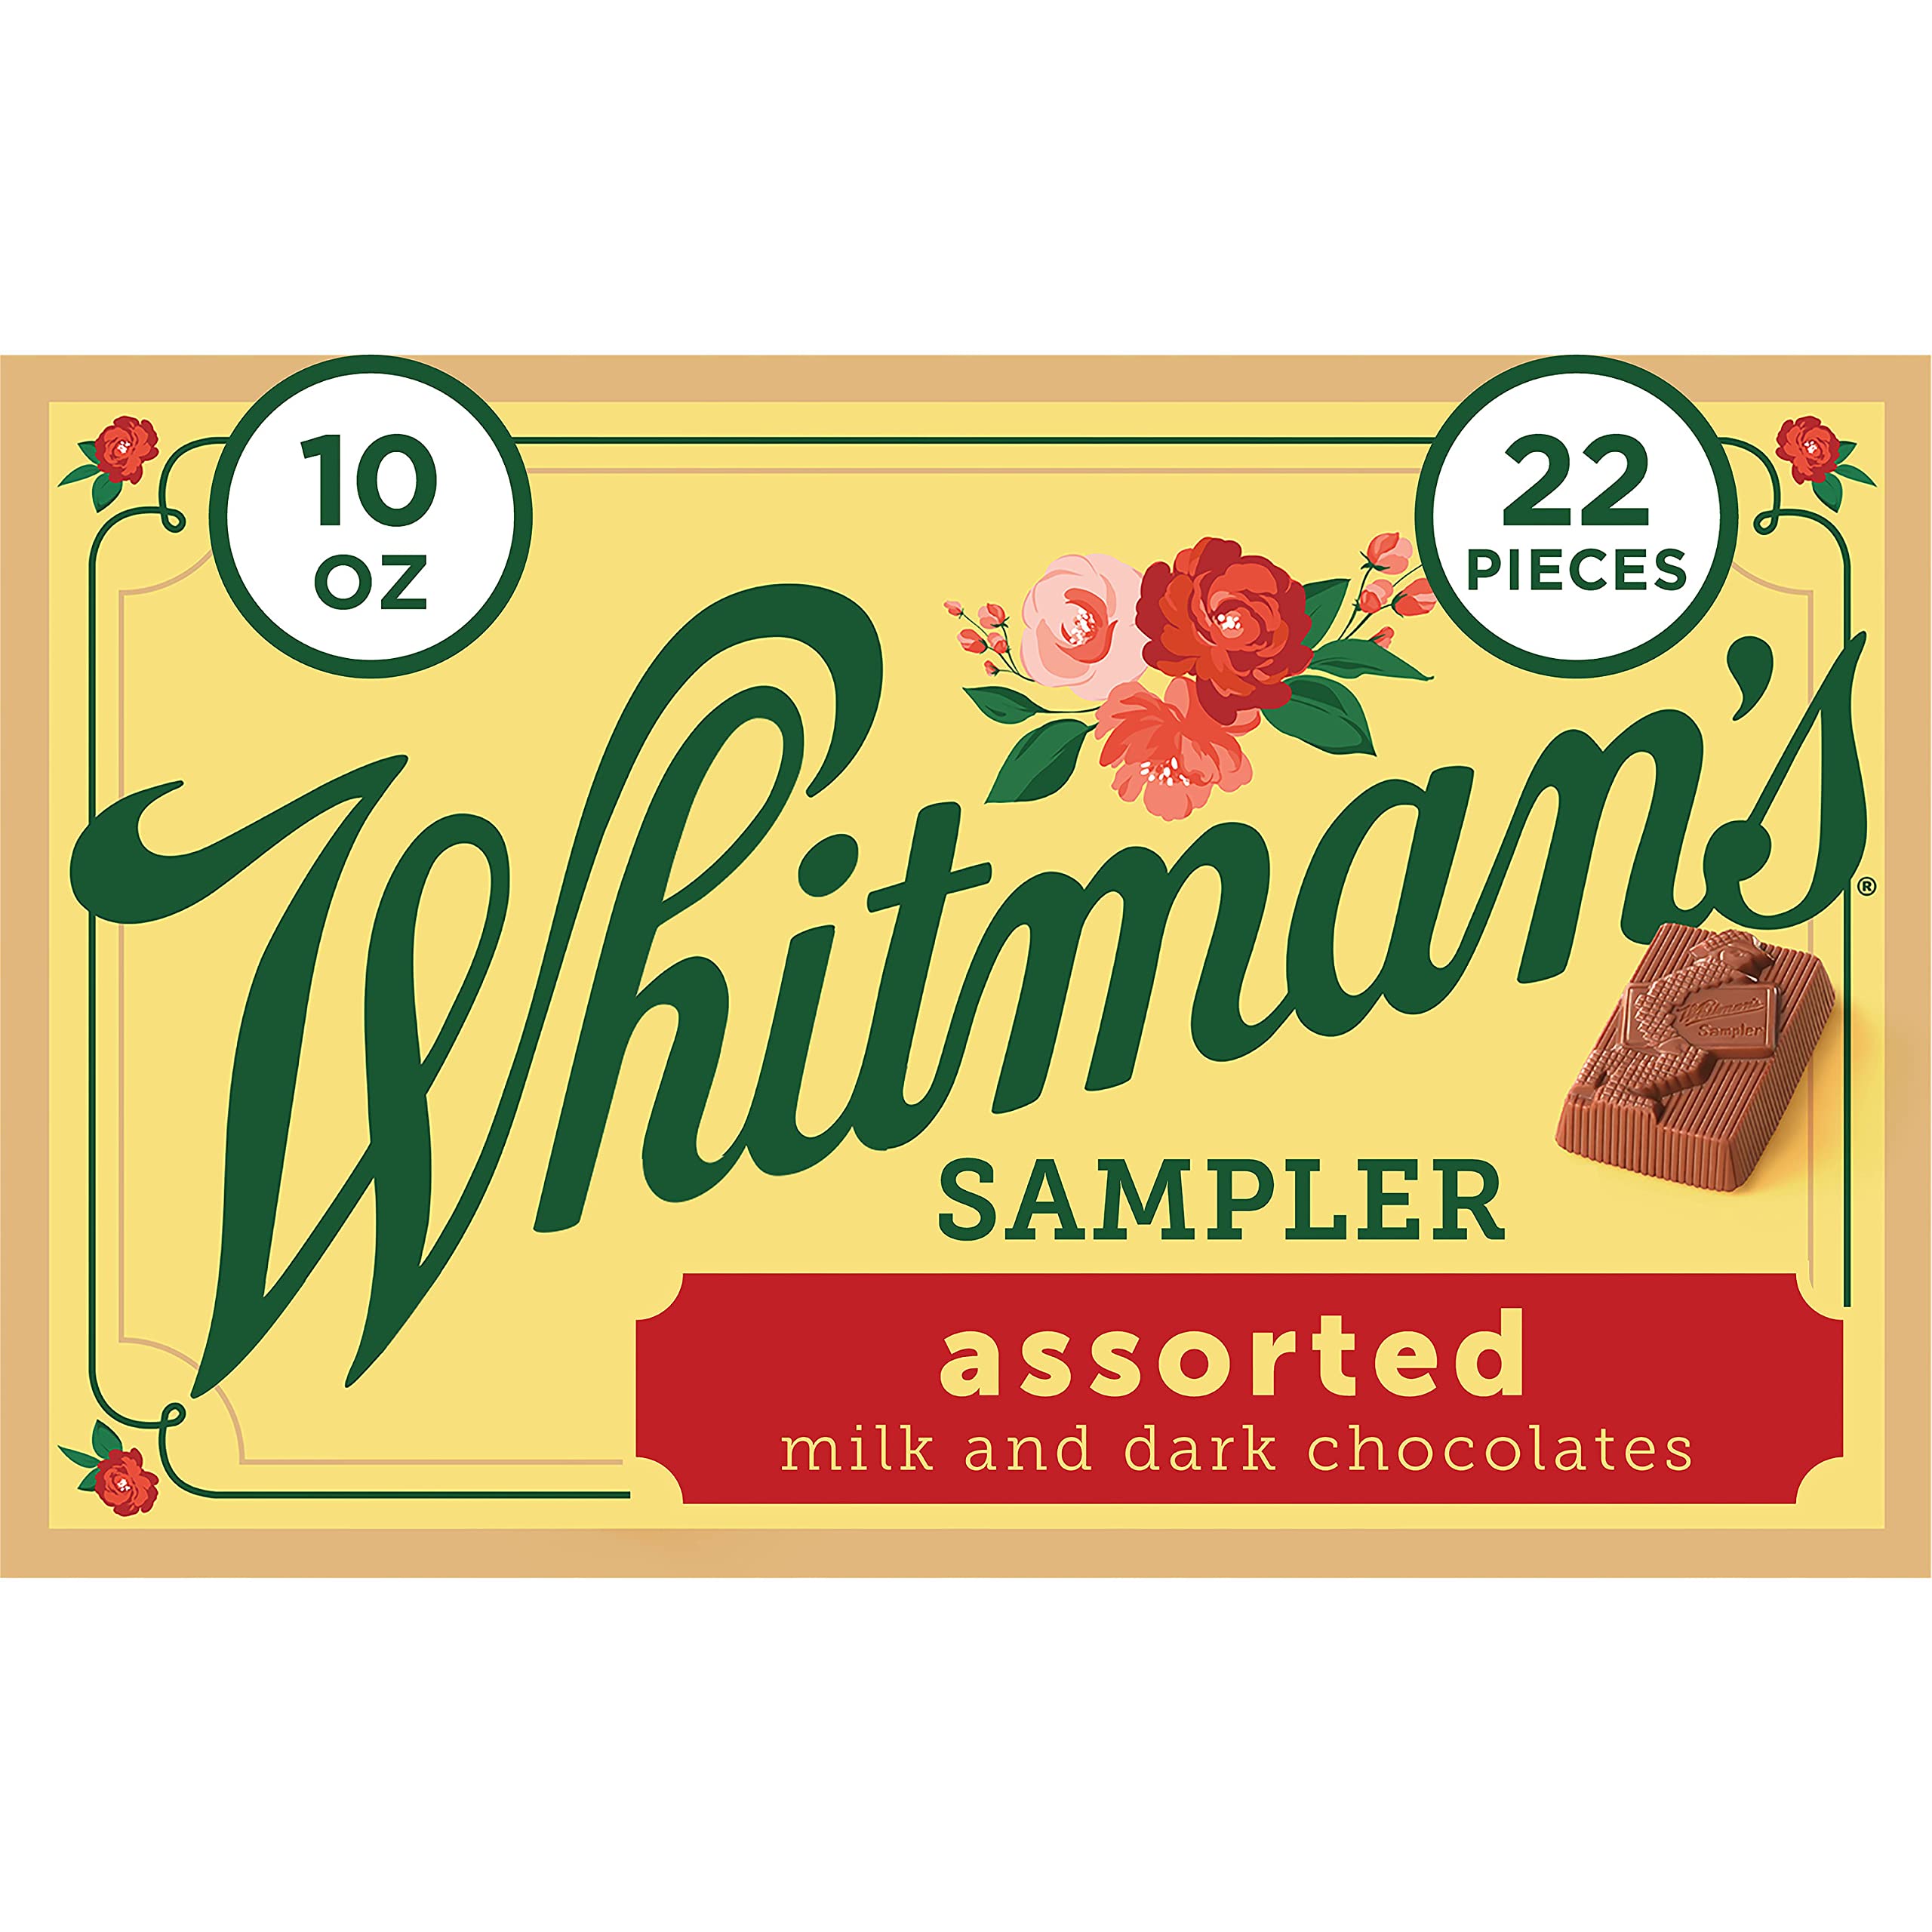 10-Oz 22-Piece Whitman's Sampler Mother's Day Assorted Chocolates (Milk & Dark) $5.24 & More + Free Shipping w/ Prime or on $35+